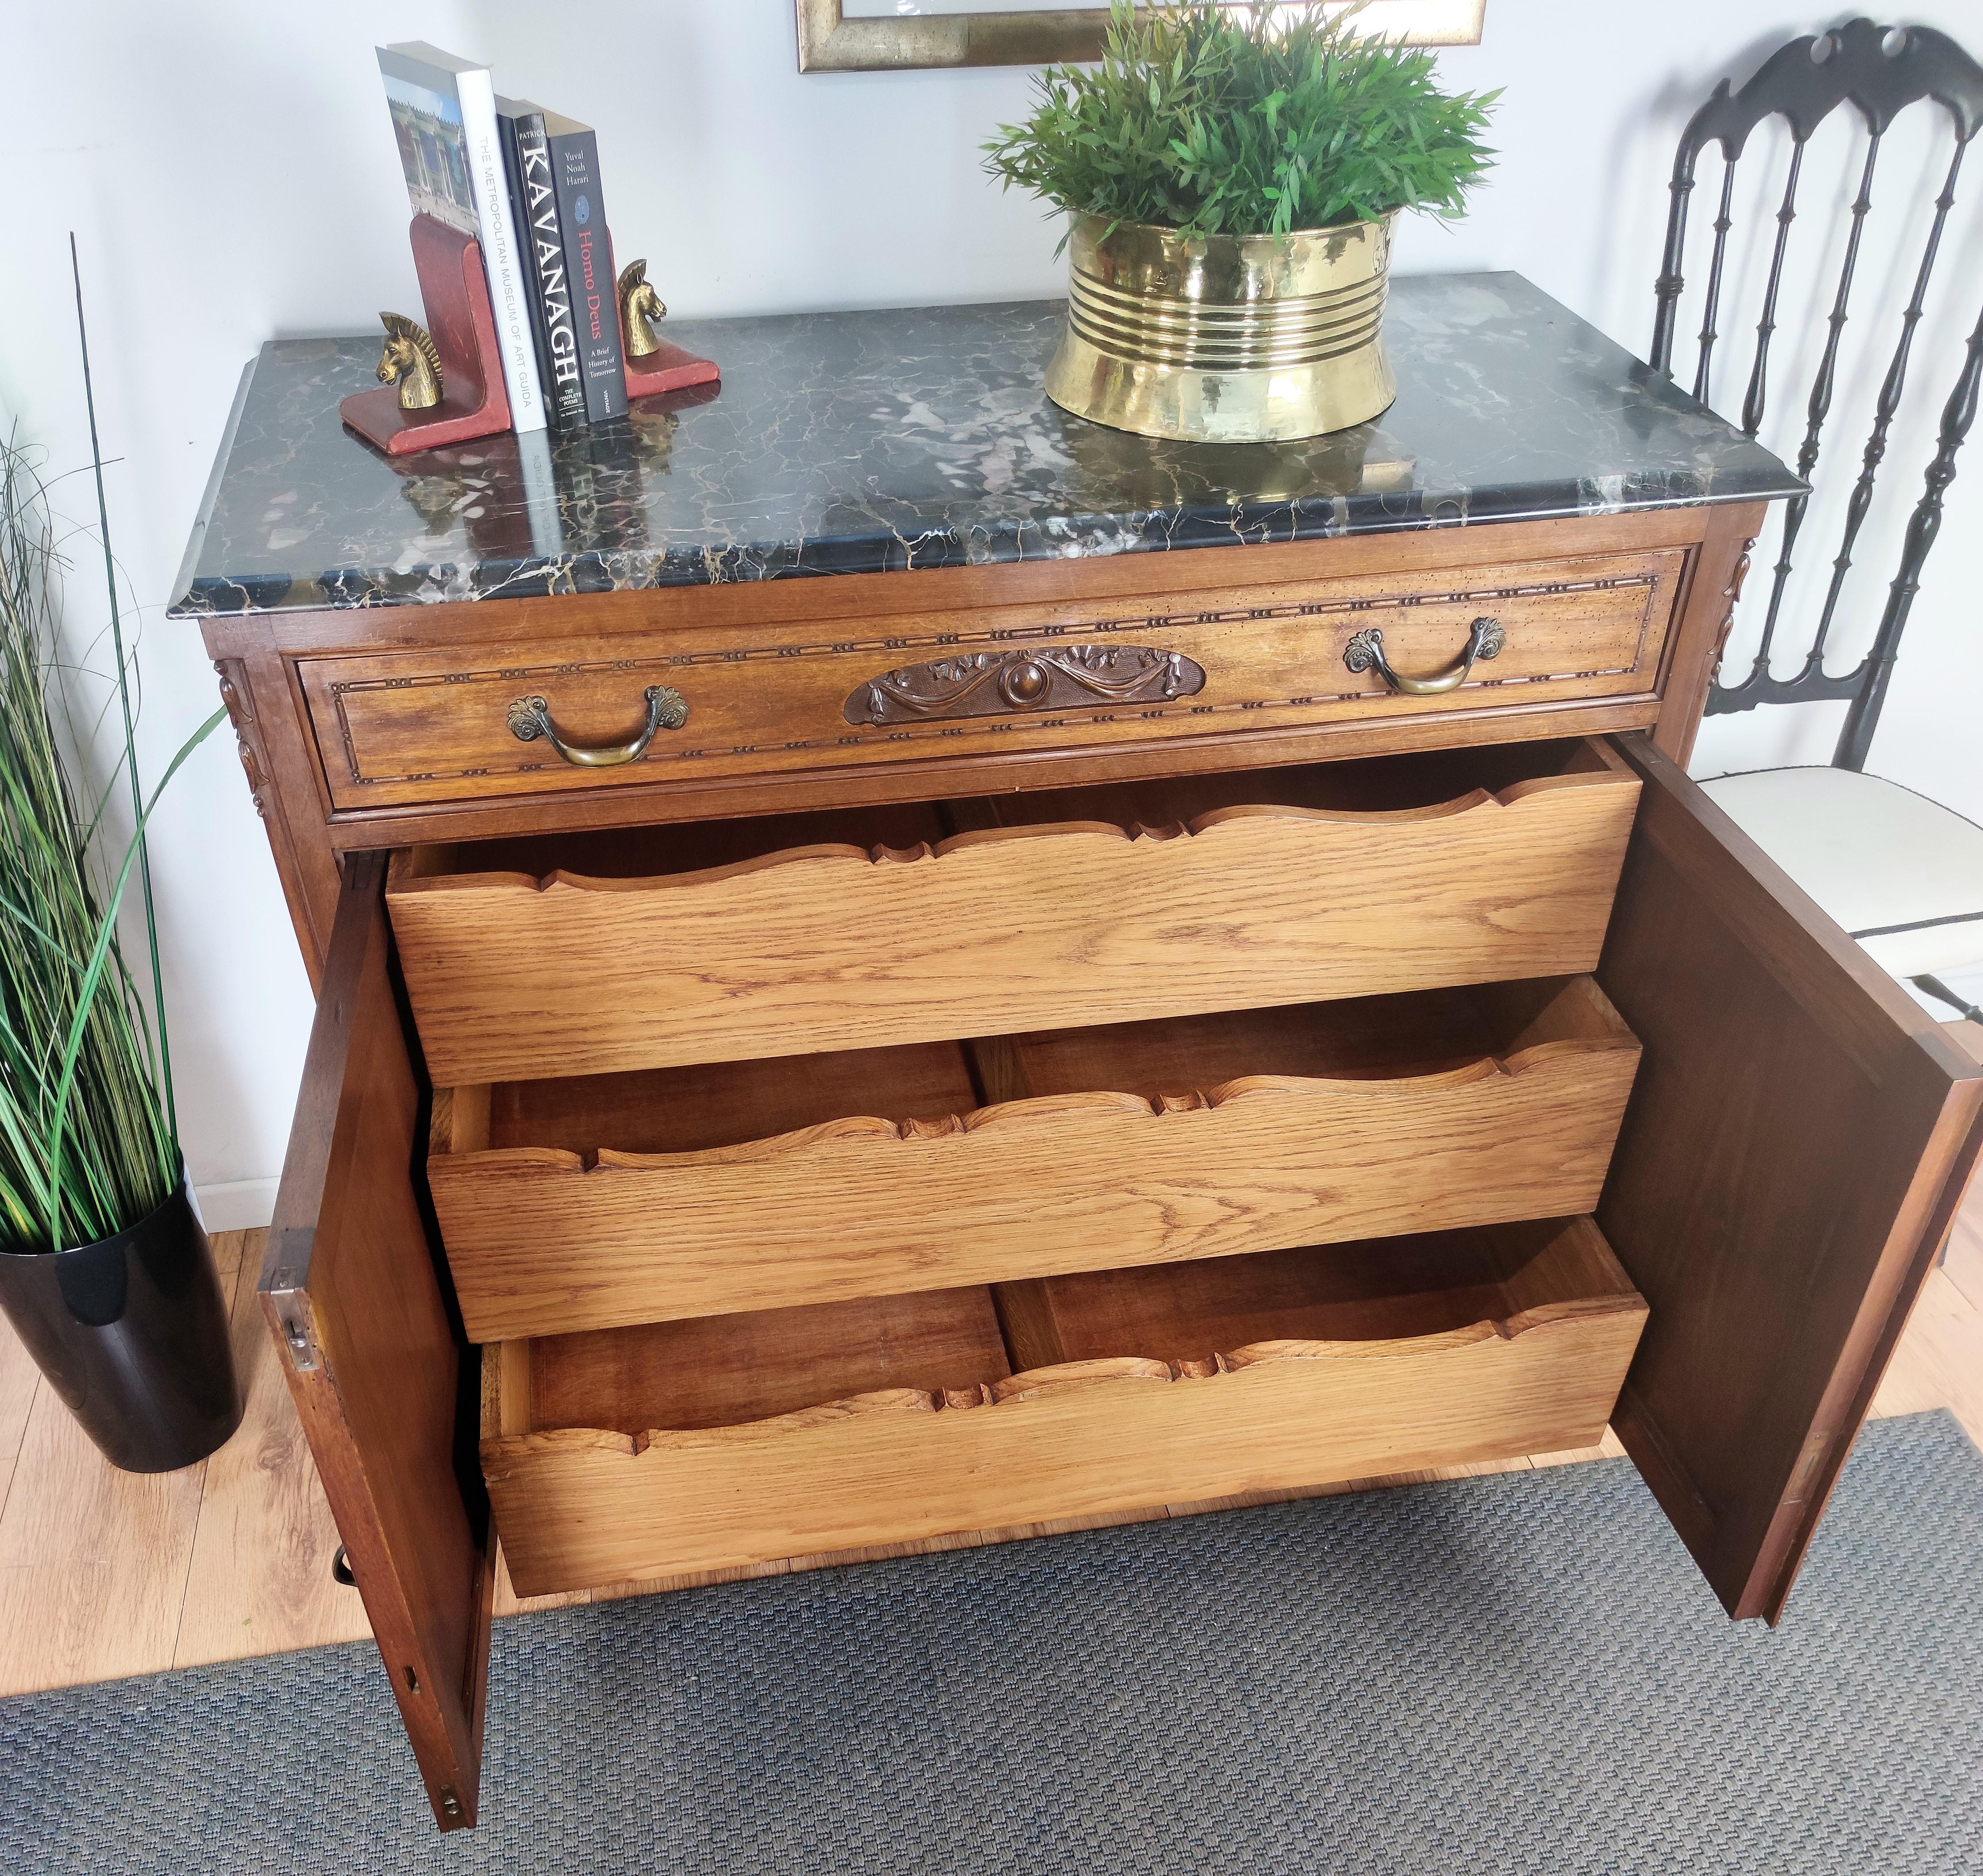 Very elegant Italian chest of drawers, with 3 greatly carved drawers hidden behind the two doors. This commode cabinet is in beautiful carved walnut wood, with floral classic decors on the top drawer and the two doors, refined by great details such